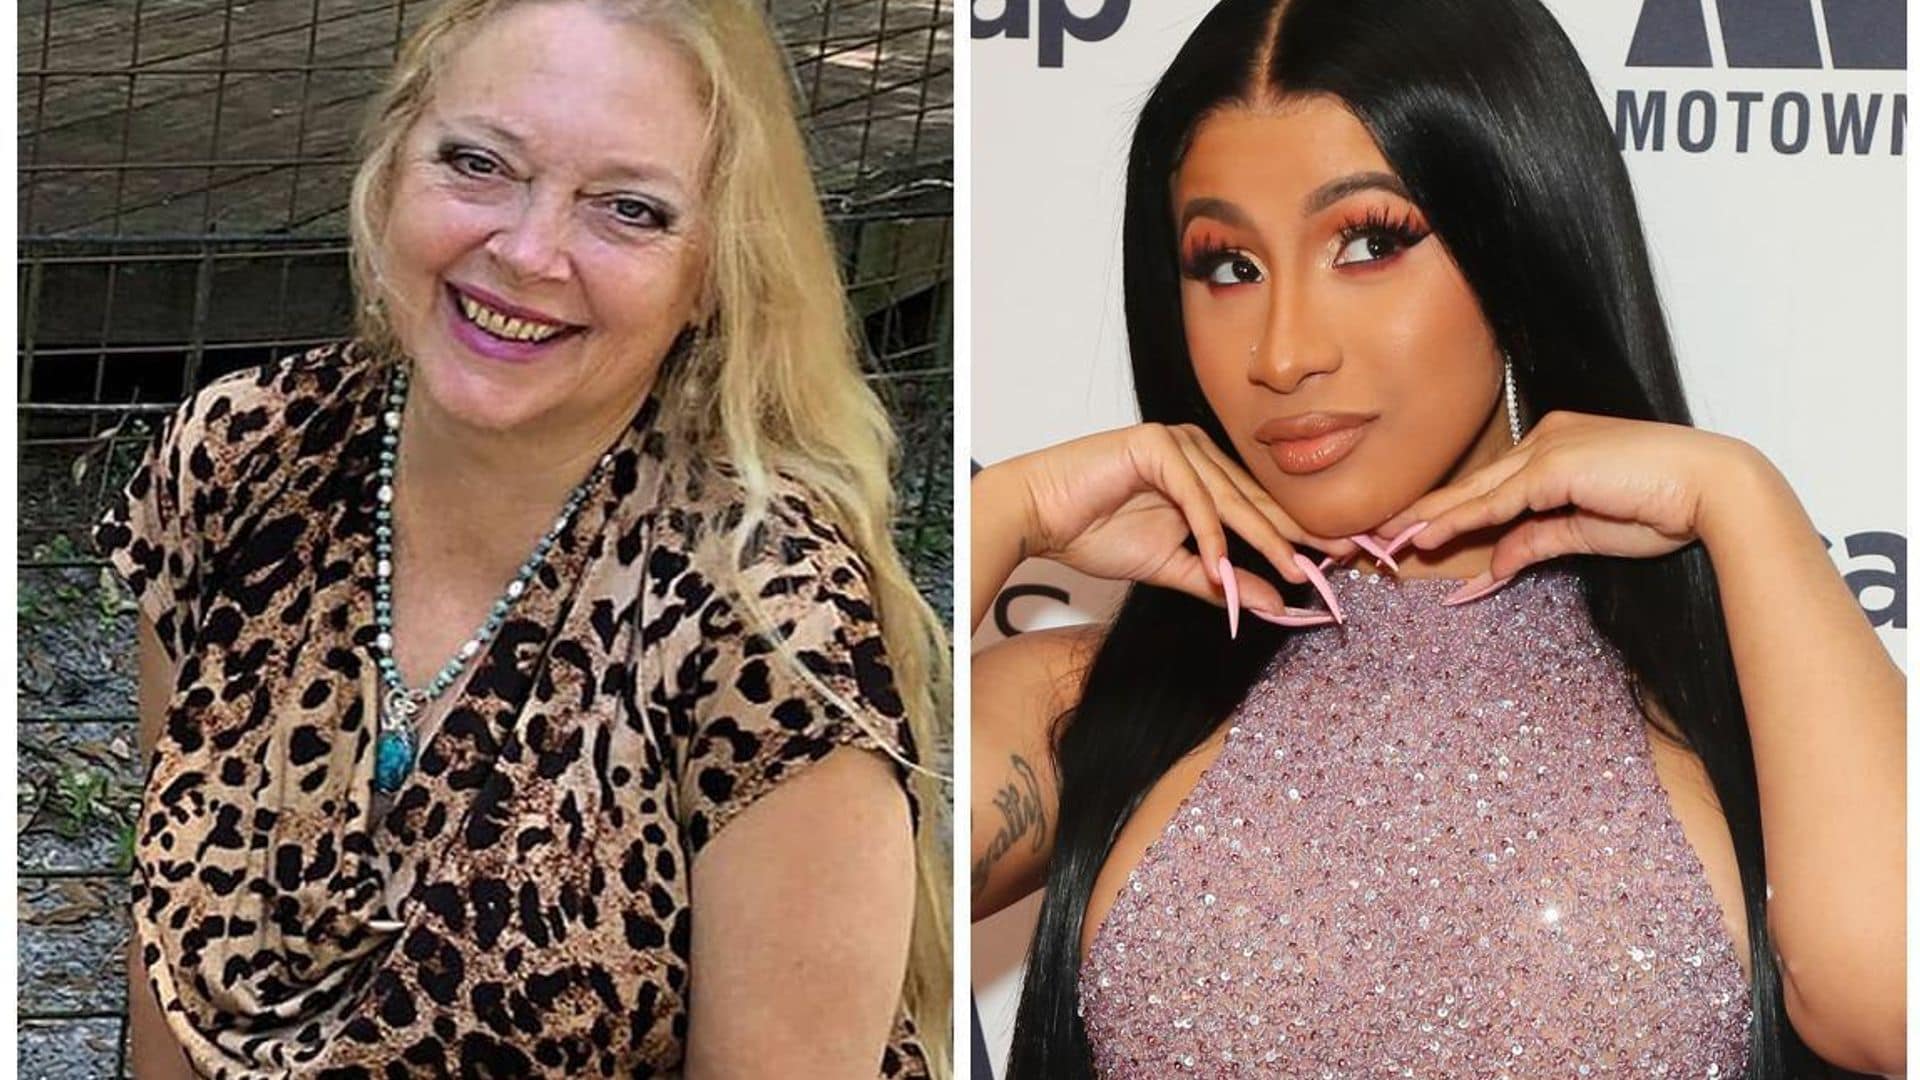 Cardi B’s savage reply to Carole Baskin is ‘Tiger King’ sequel we didn’t know we needed